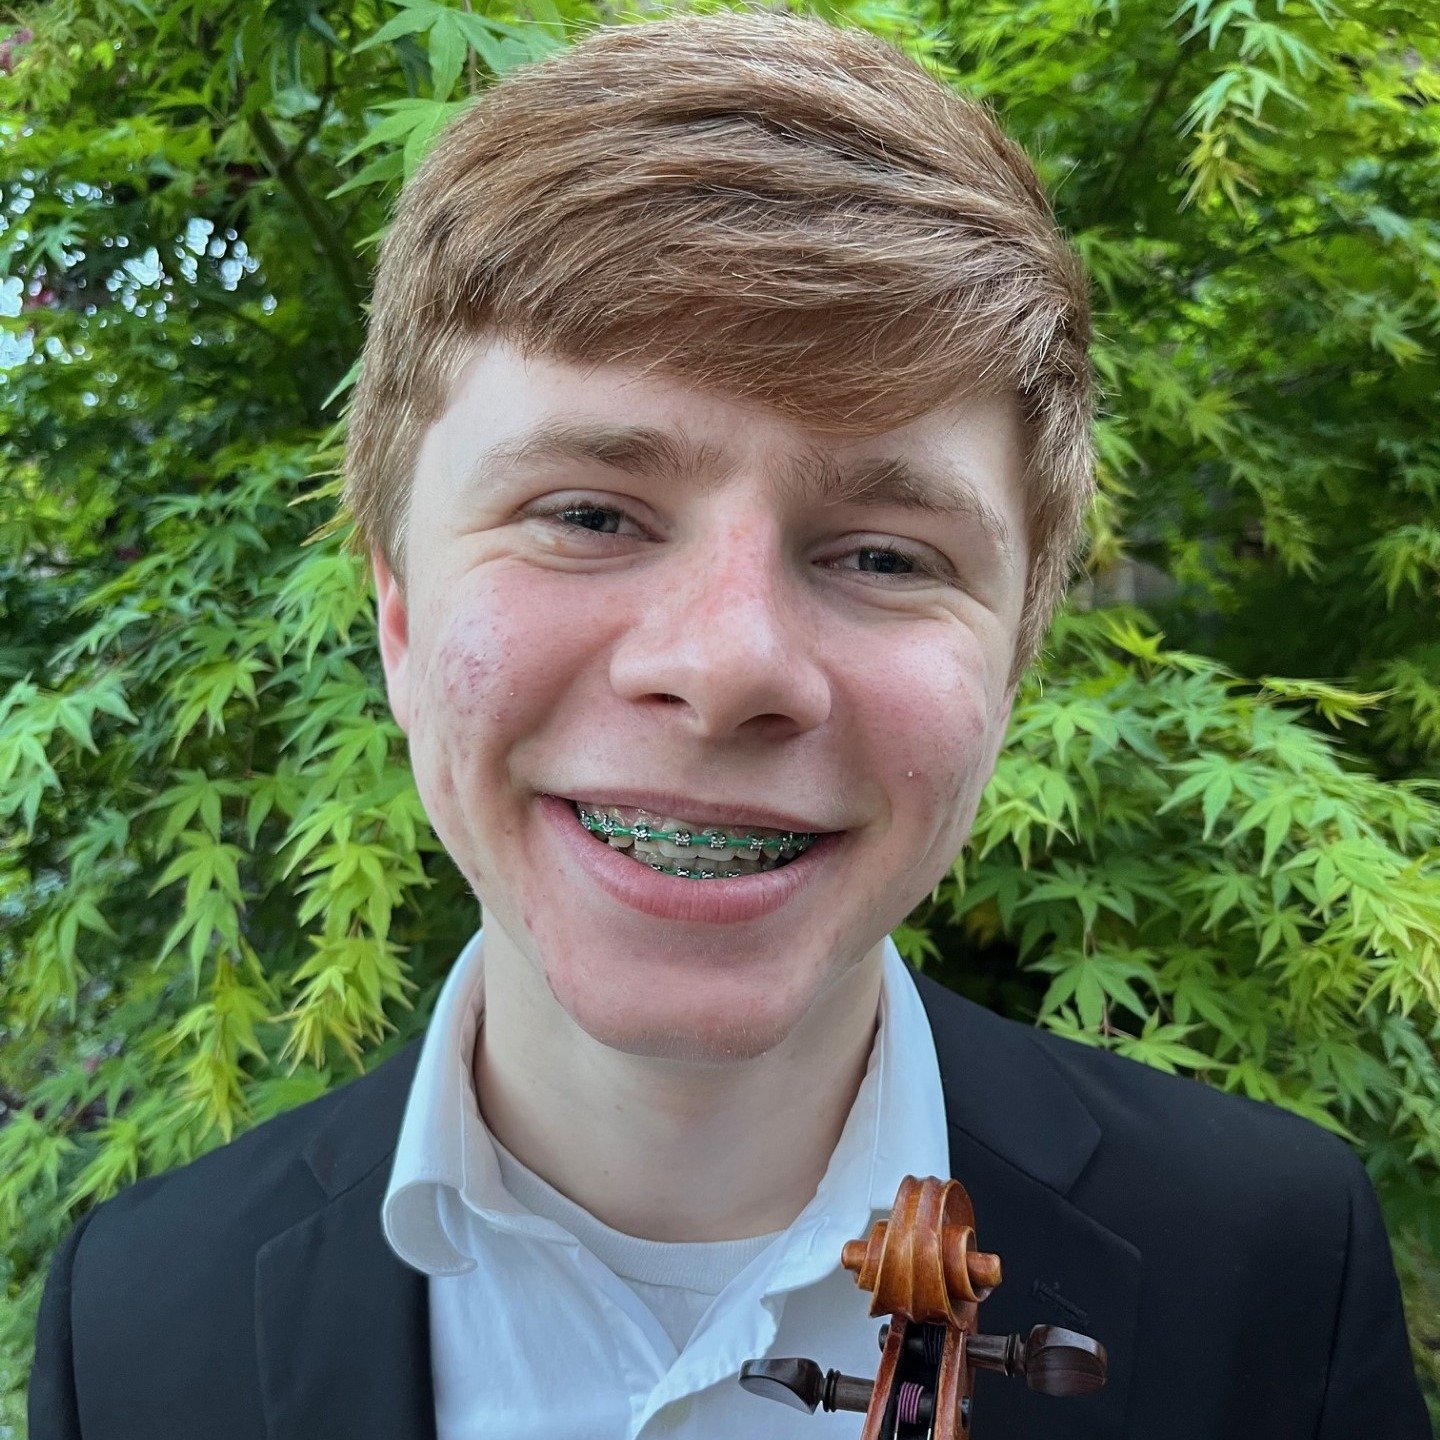 Congratulations to Samuel Kraus, winner of the MSYO's annual Concerto Competition! 🏆Come see Samuel this weekend, at the MSYO's Season Finale concert! He'll be performing  the first movement of the Mozart Violin Concerto No. 5 in A Major.